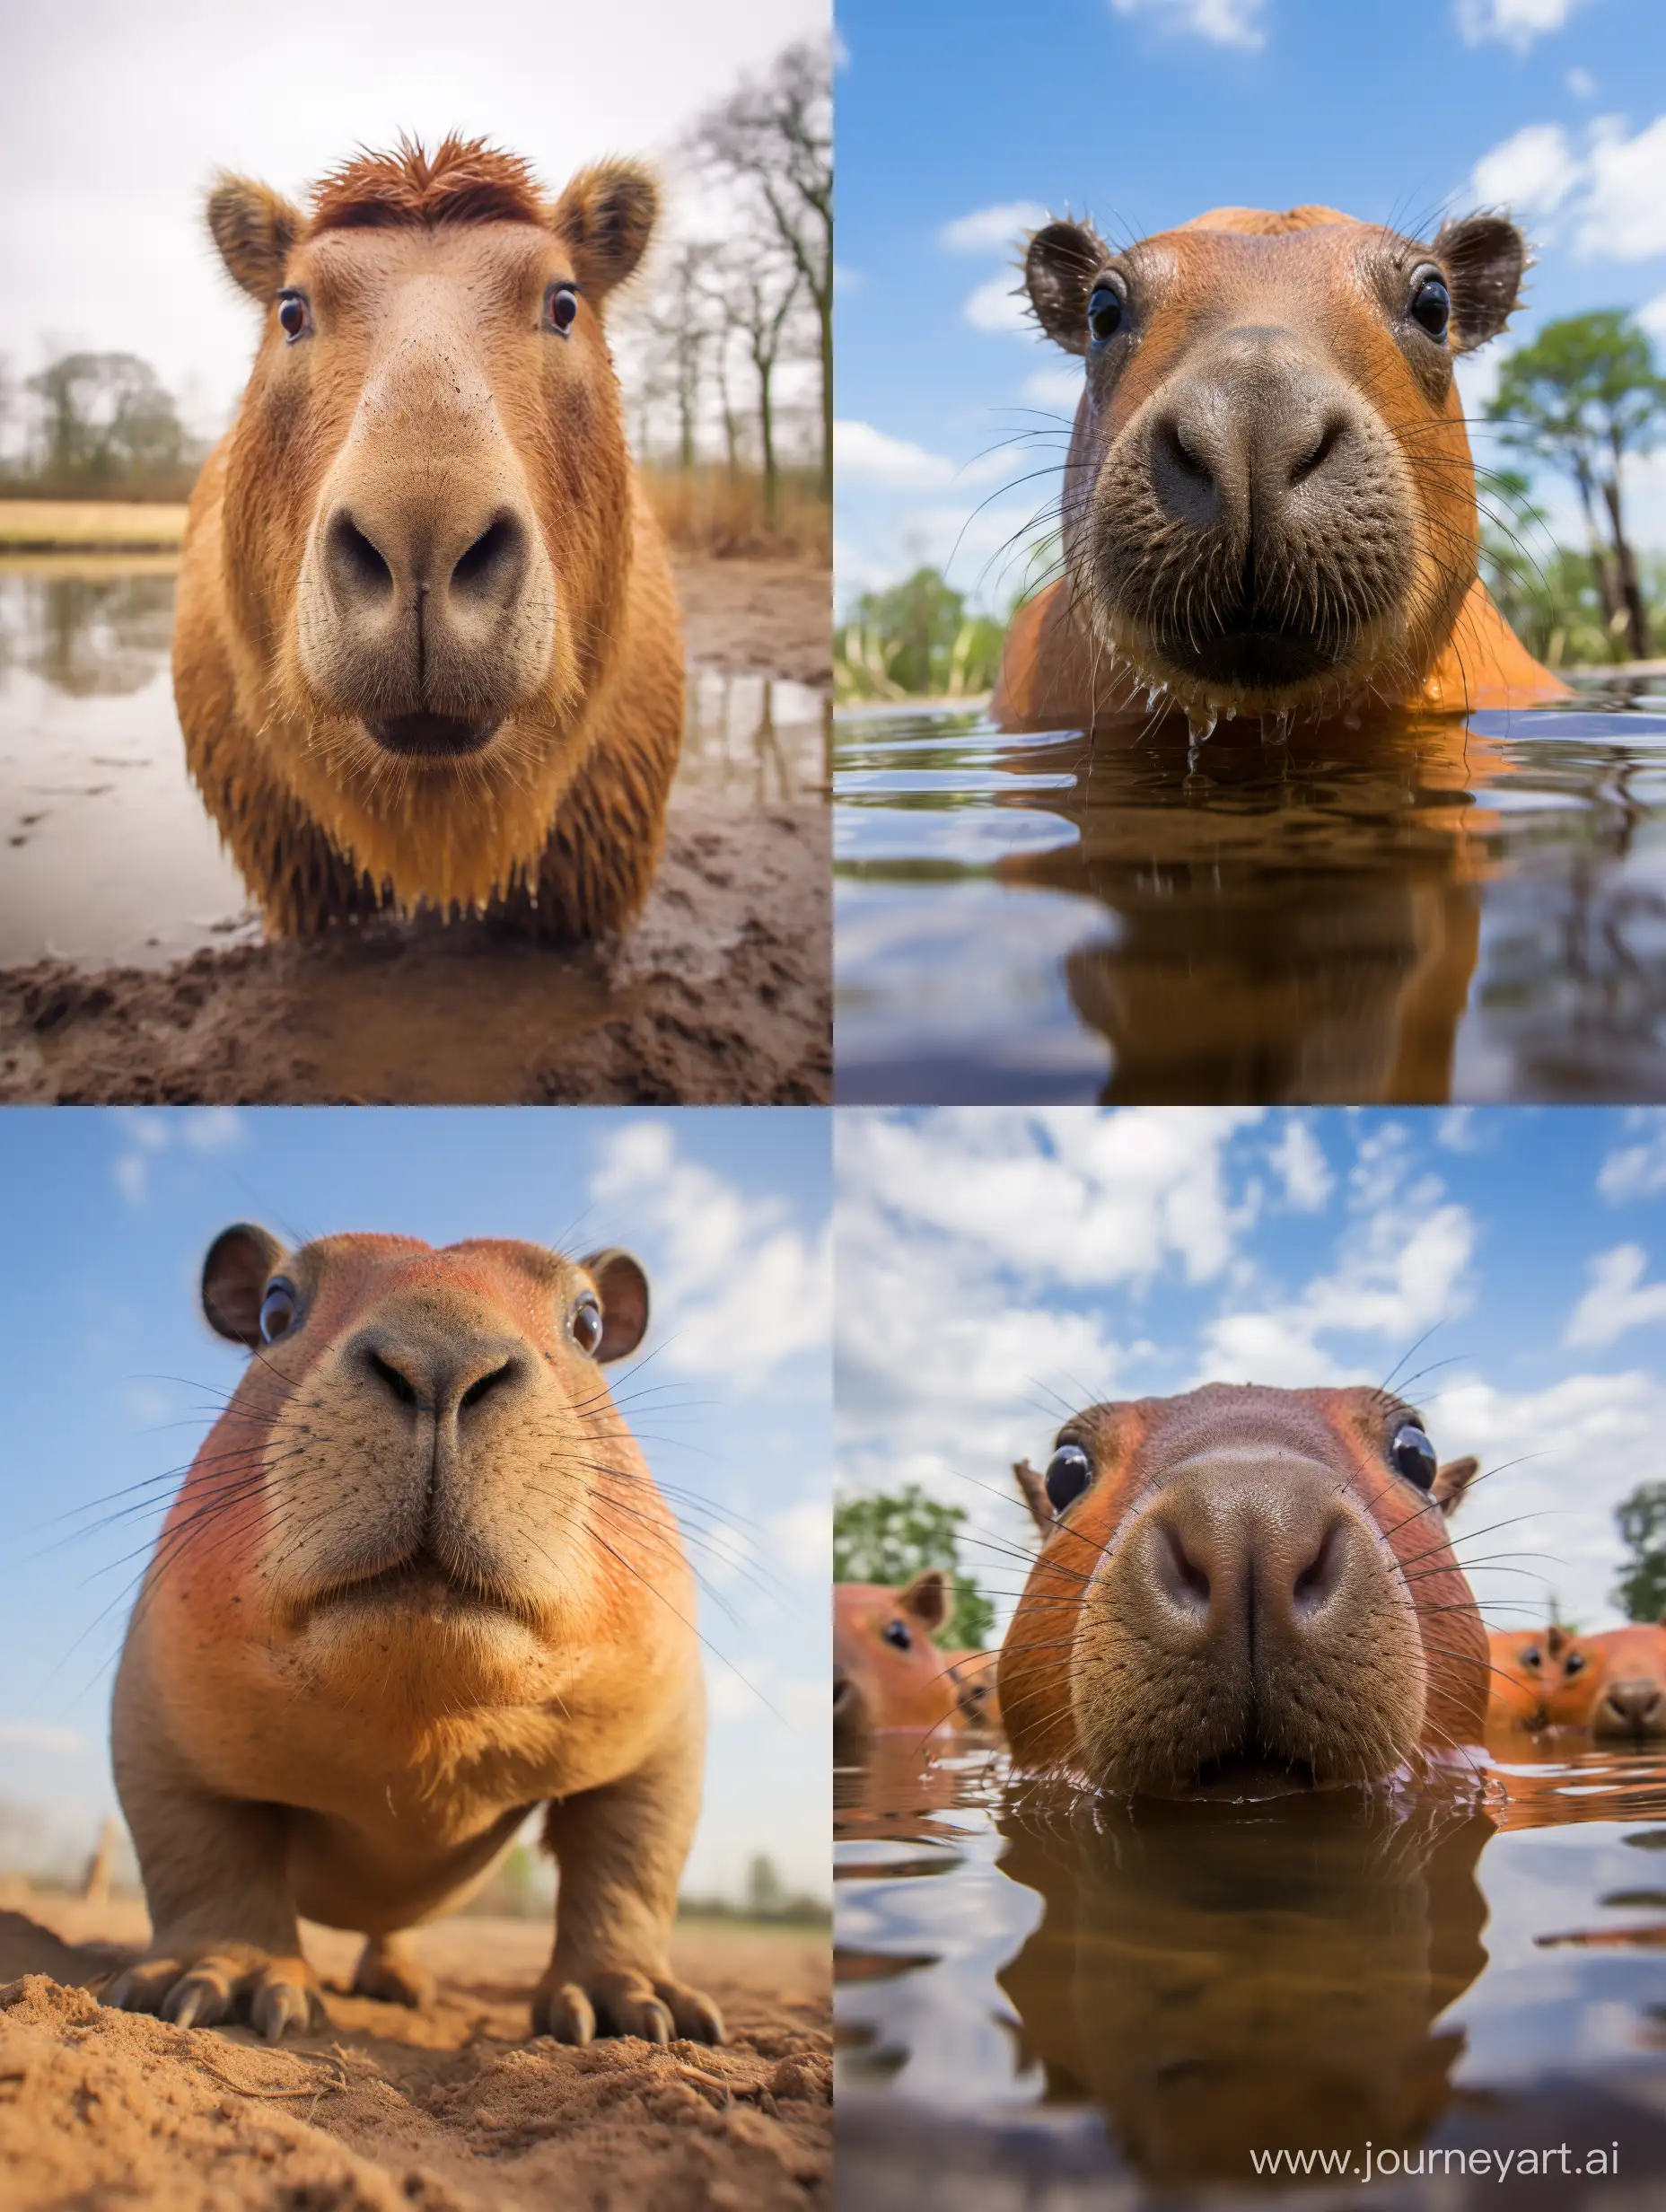 Majestic-Capybara-Portrait-Full-Height-Professional-Photo-in-High-Detail